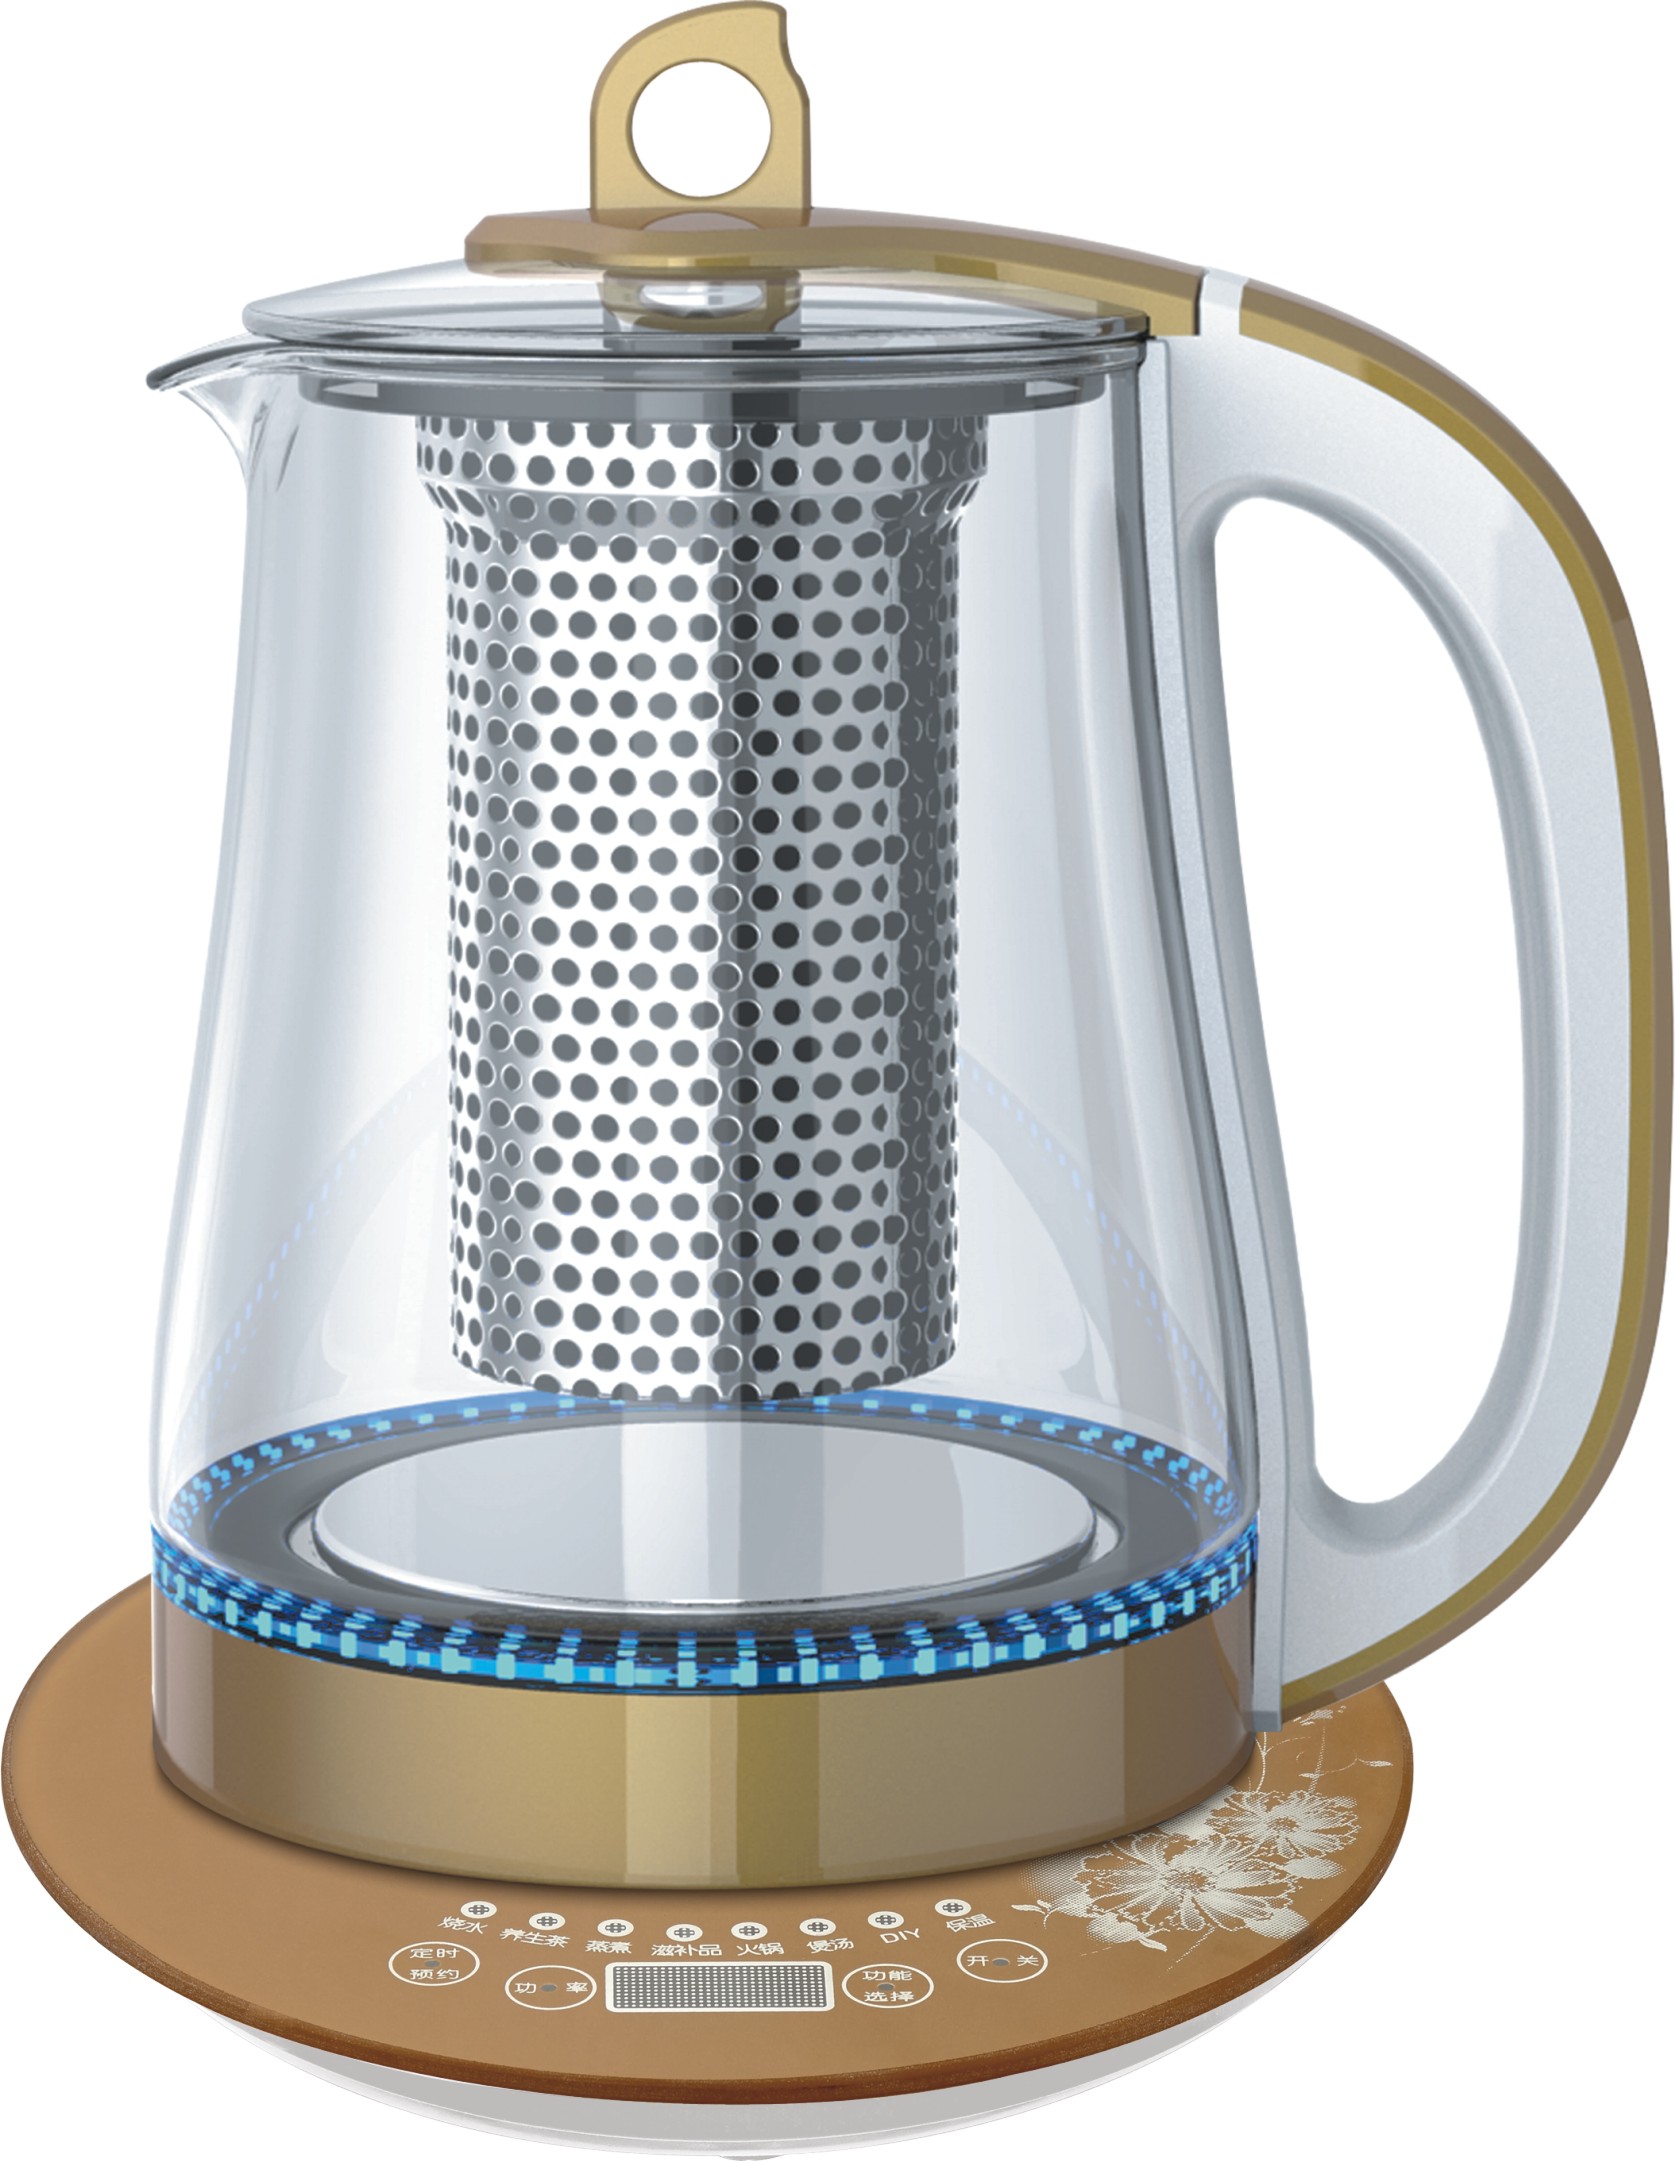 A type of electriic kettle